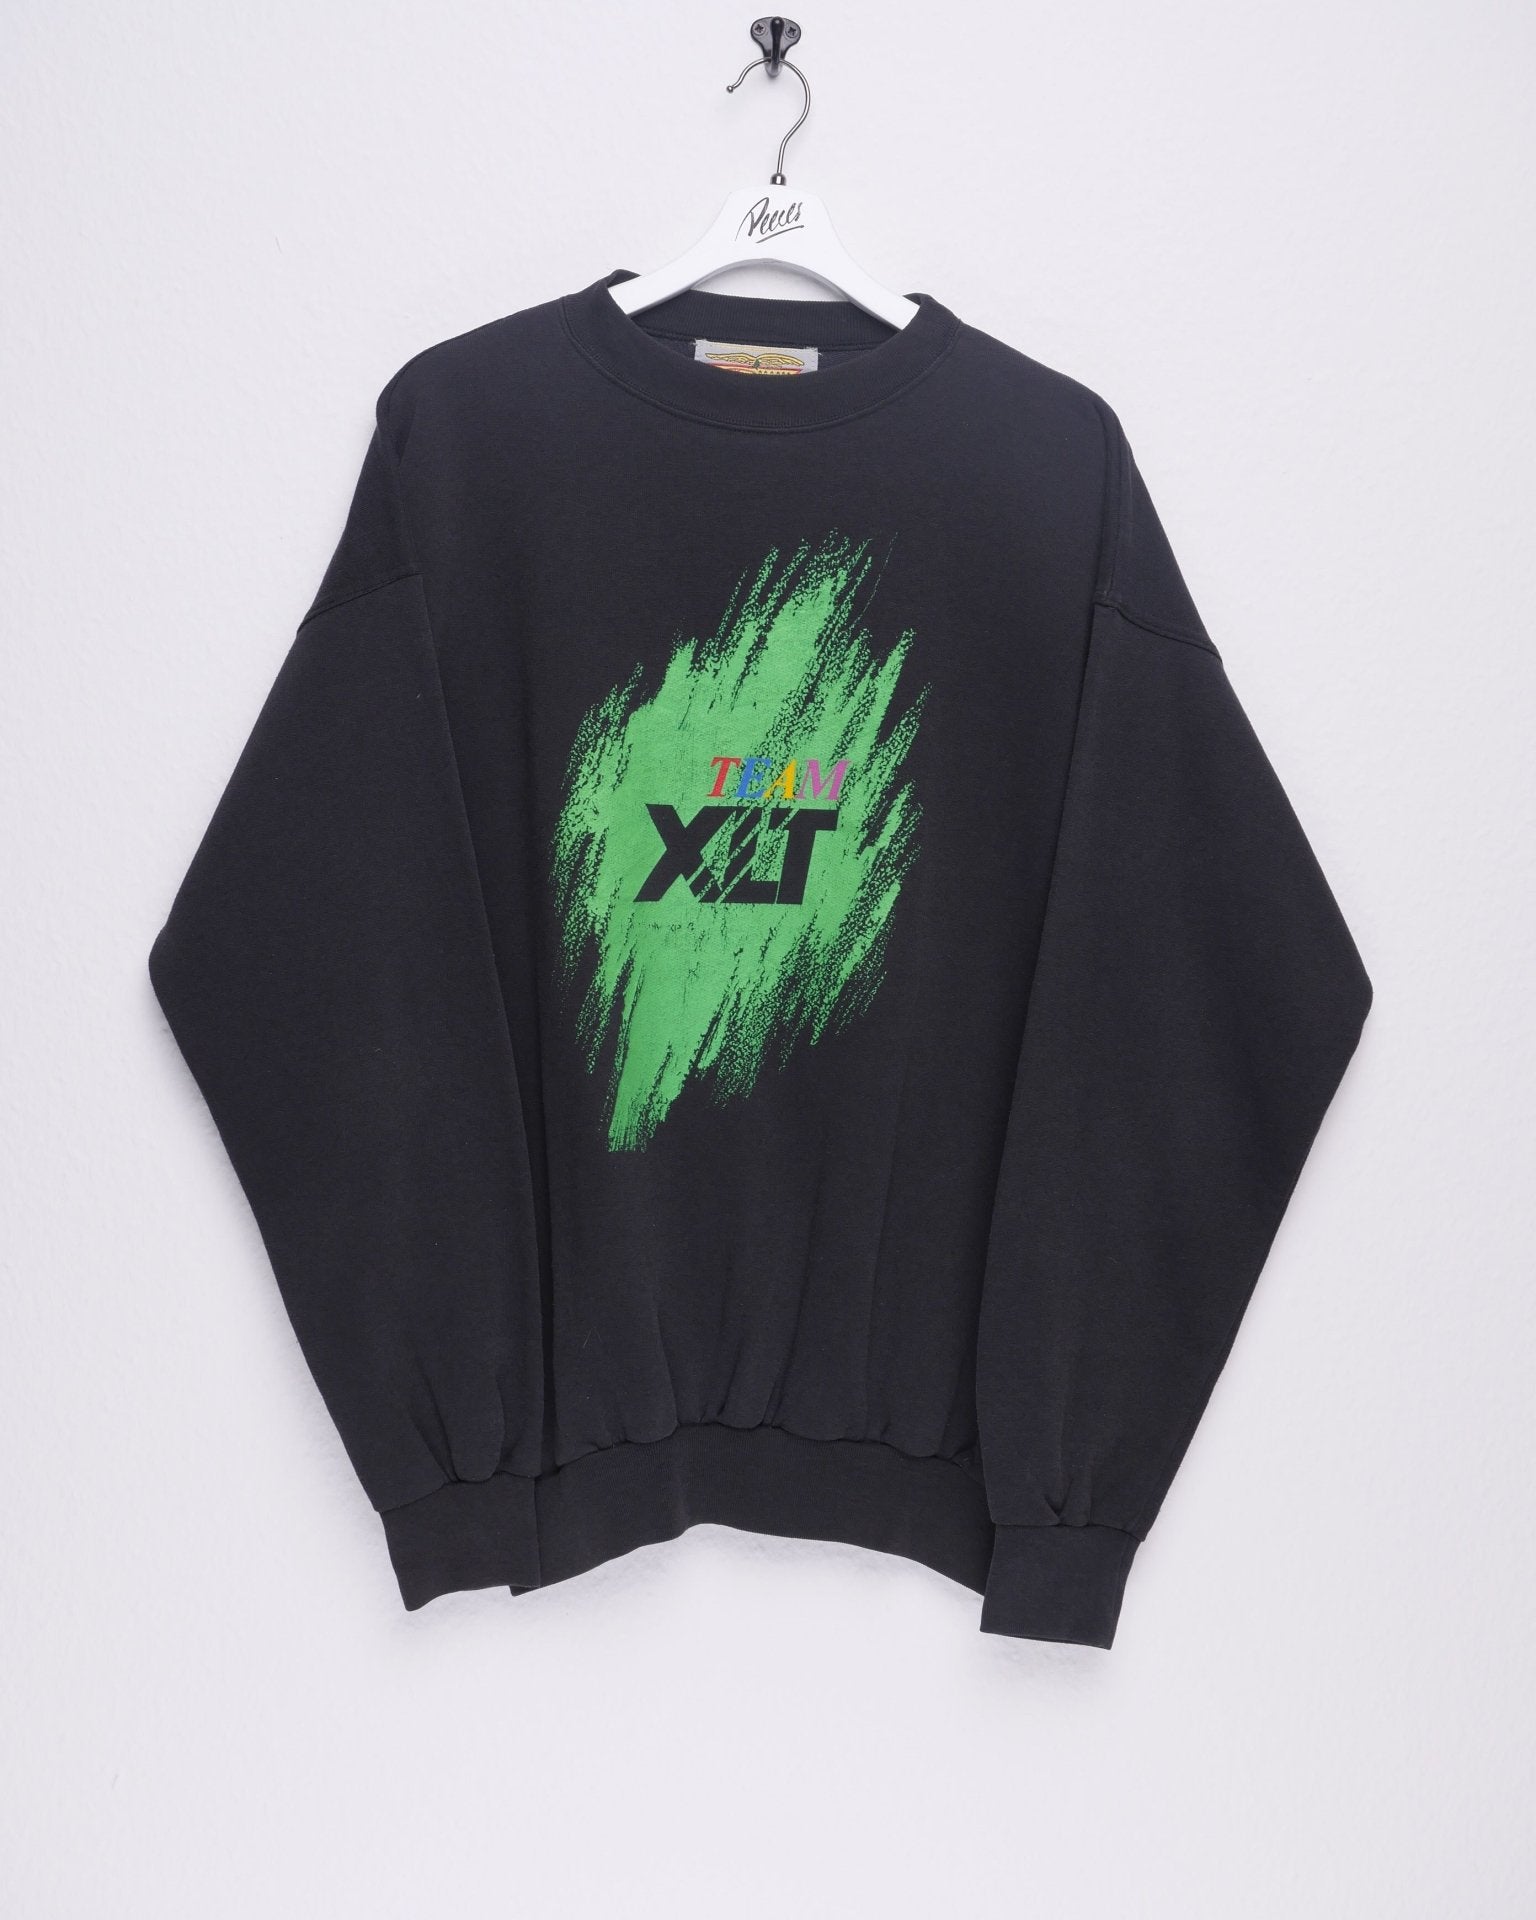 Team XLT printed Logo washed Vintage Sweater - Peeces